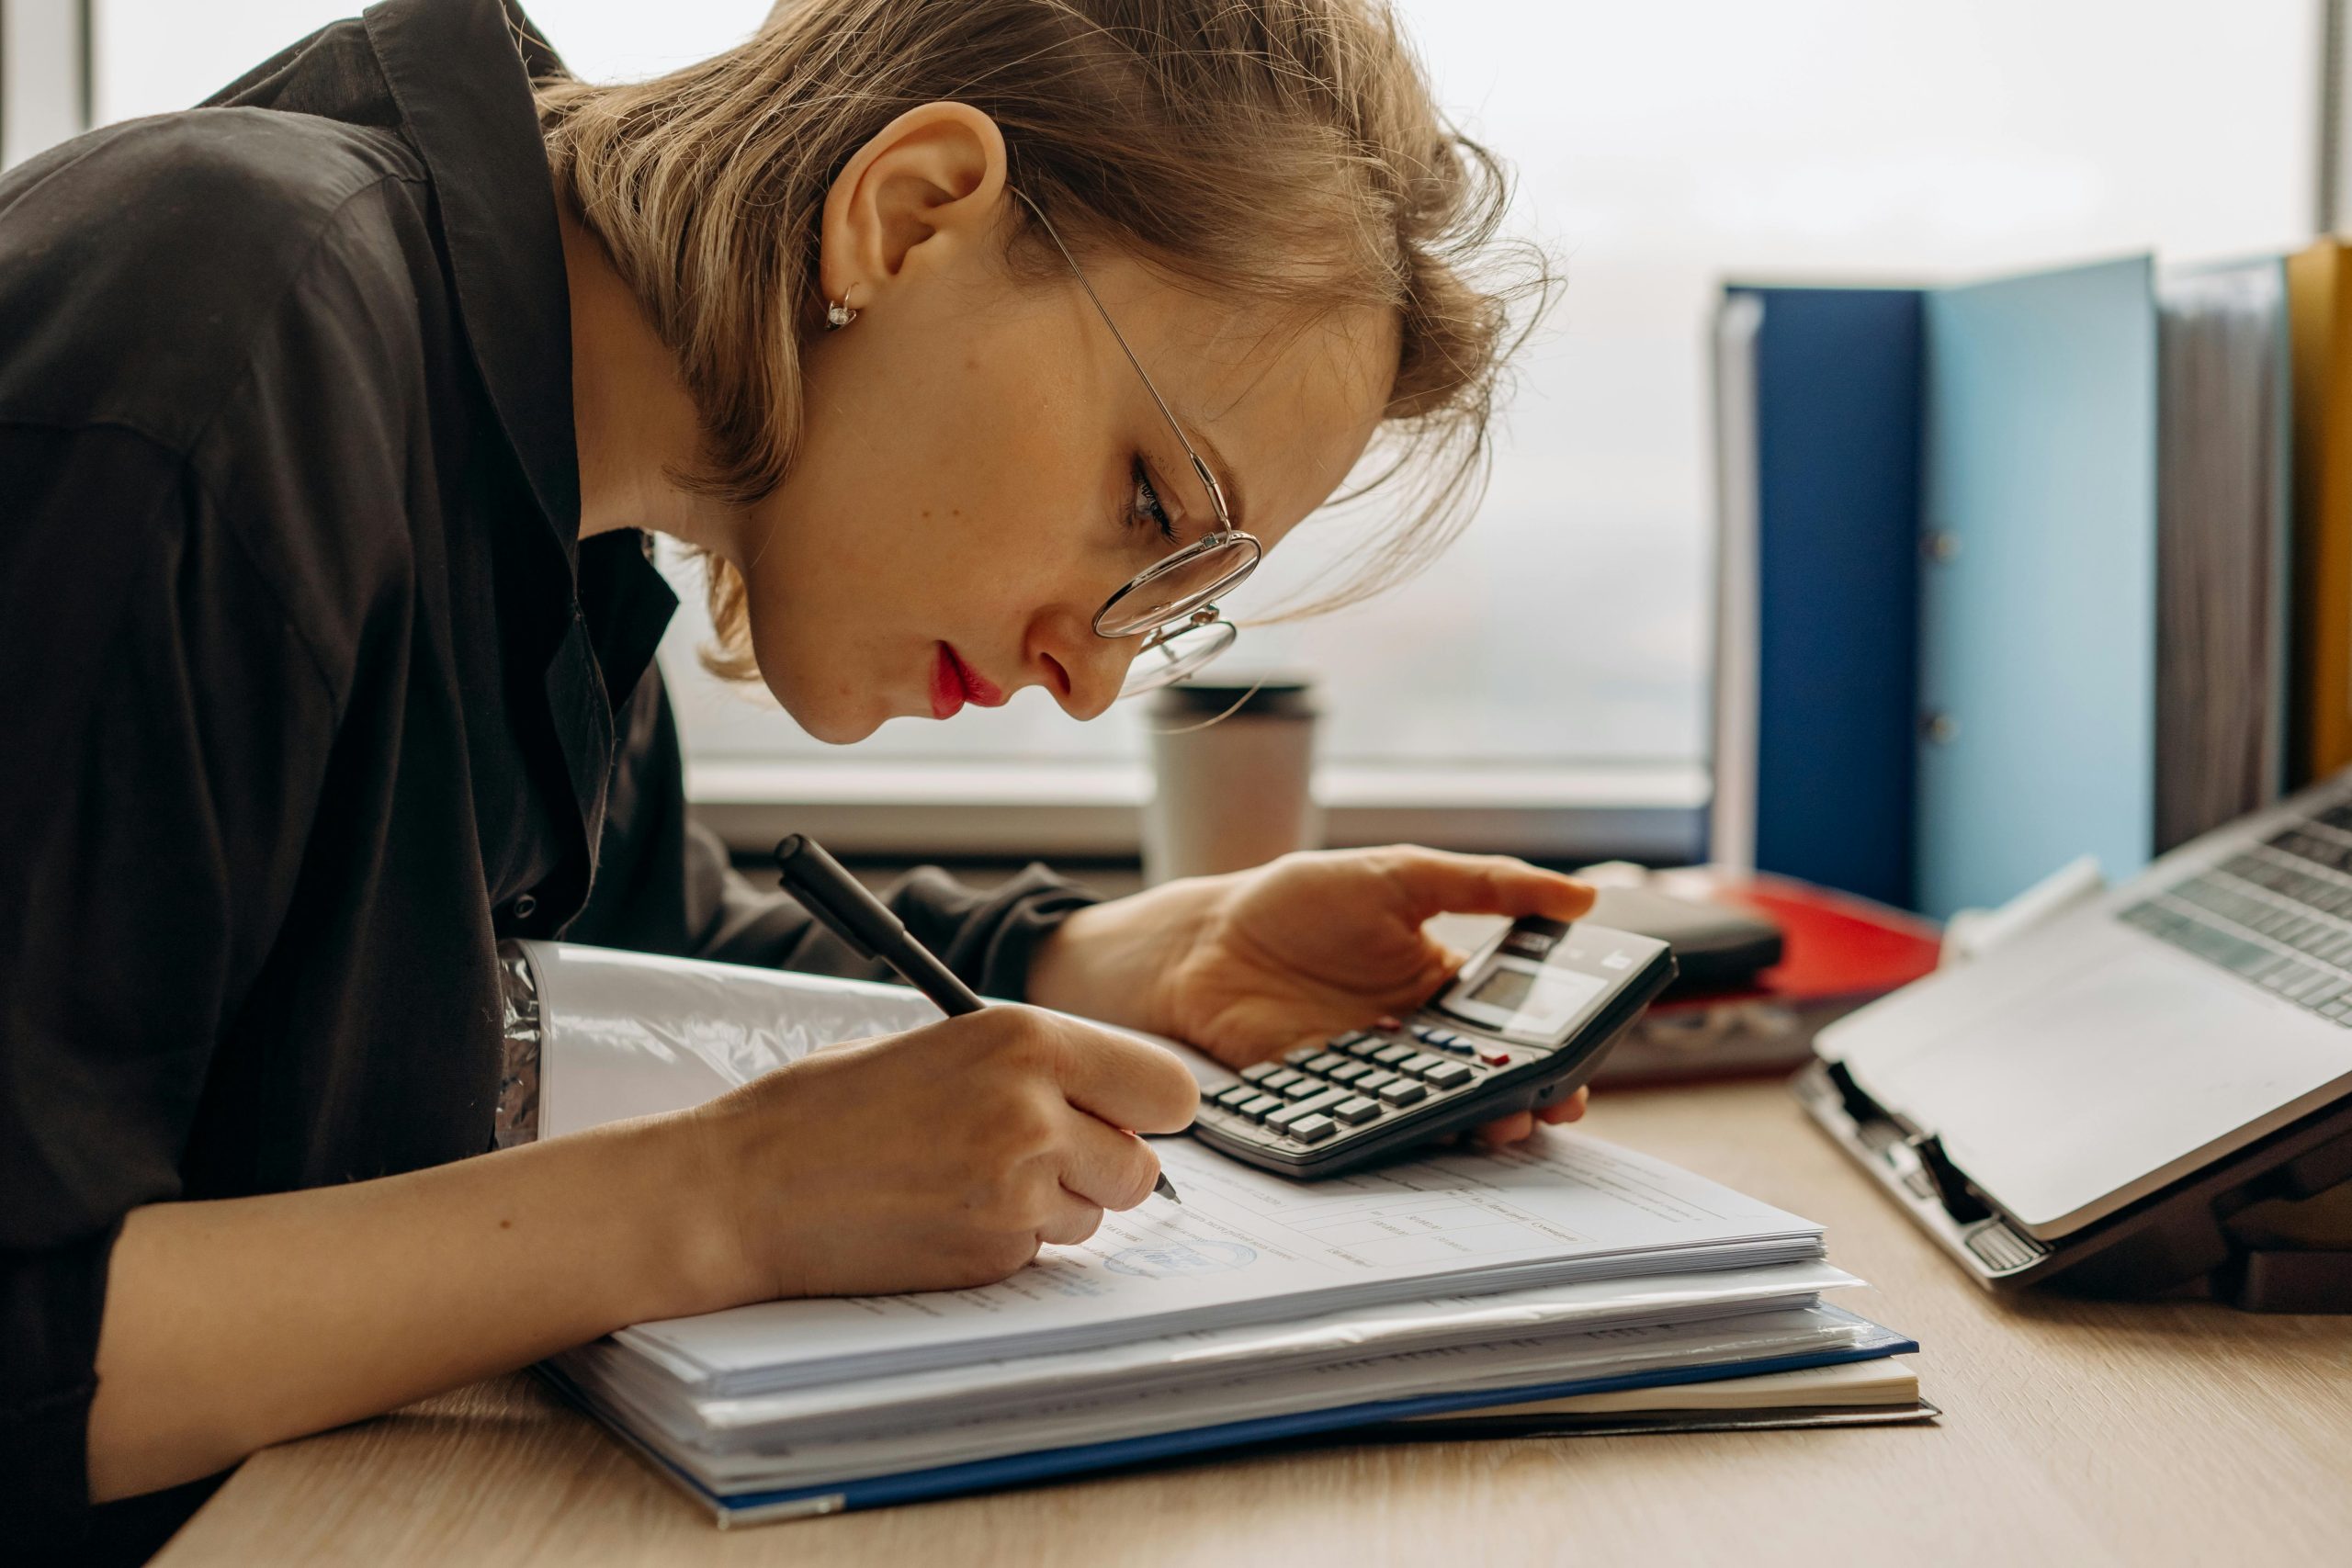 accountant writing and calculating using a calculator